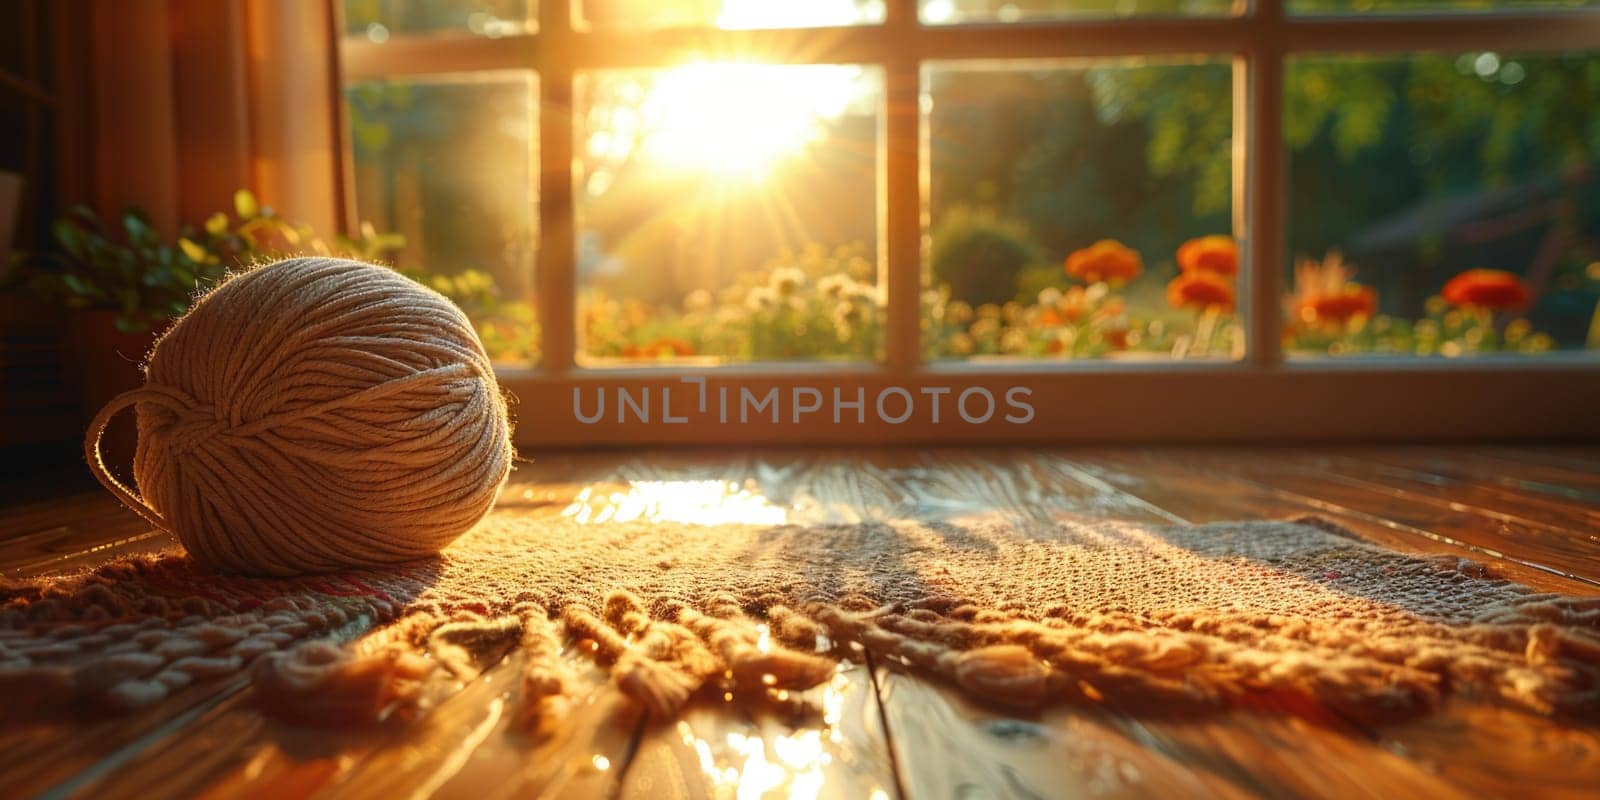 A ball of yarn sits on a wooden floor in front of a window, illuminated by sunlight.